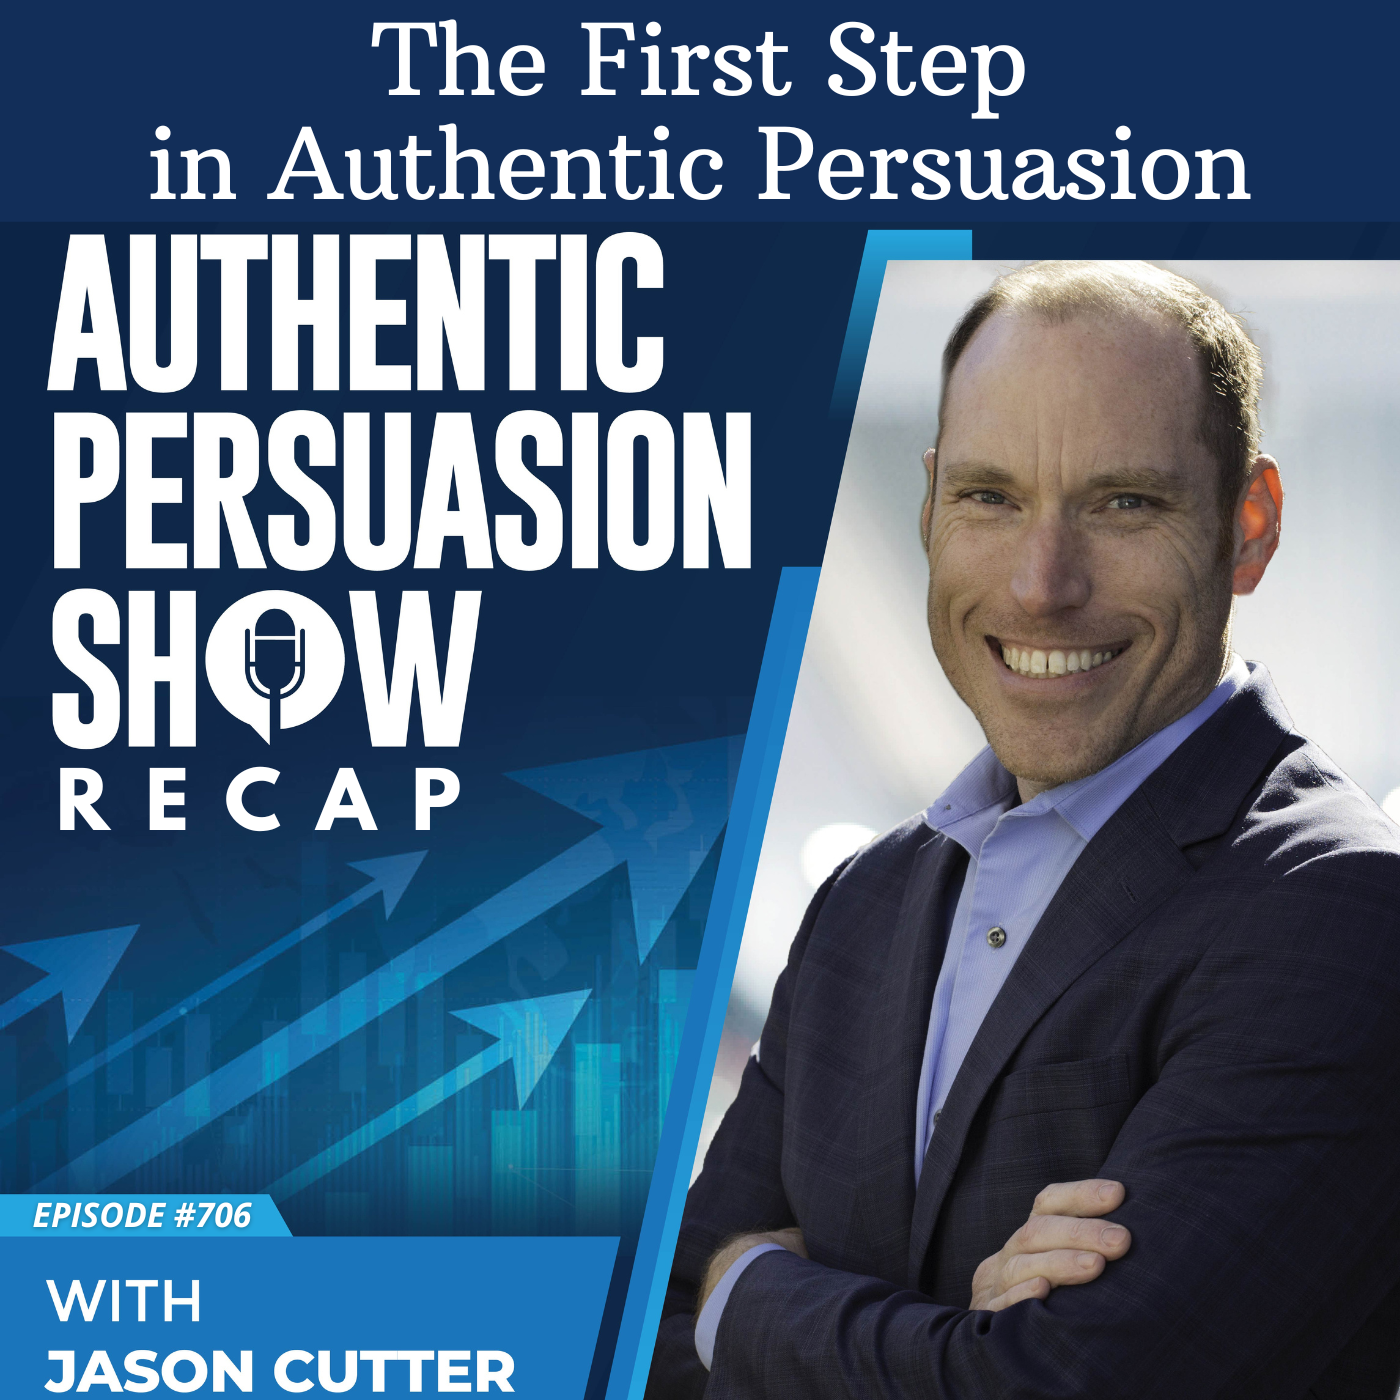 [706] The First Step in Authentic Persuasion